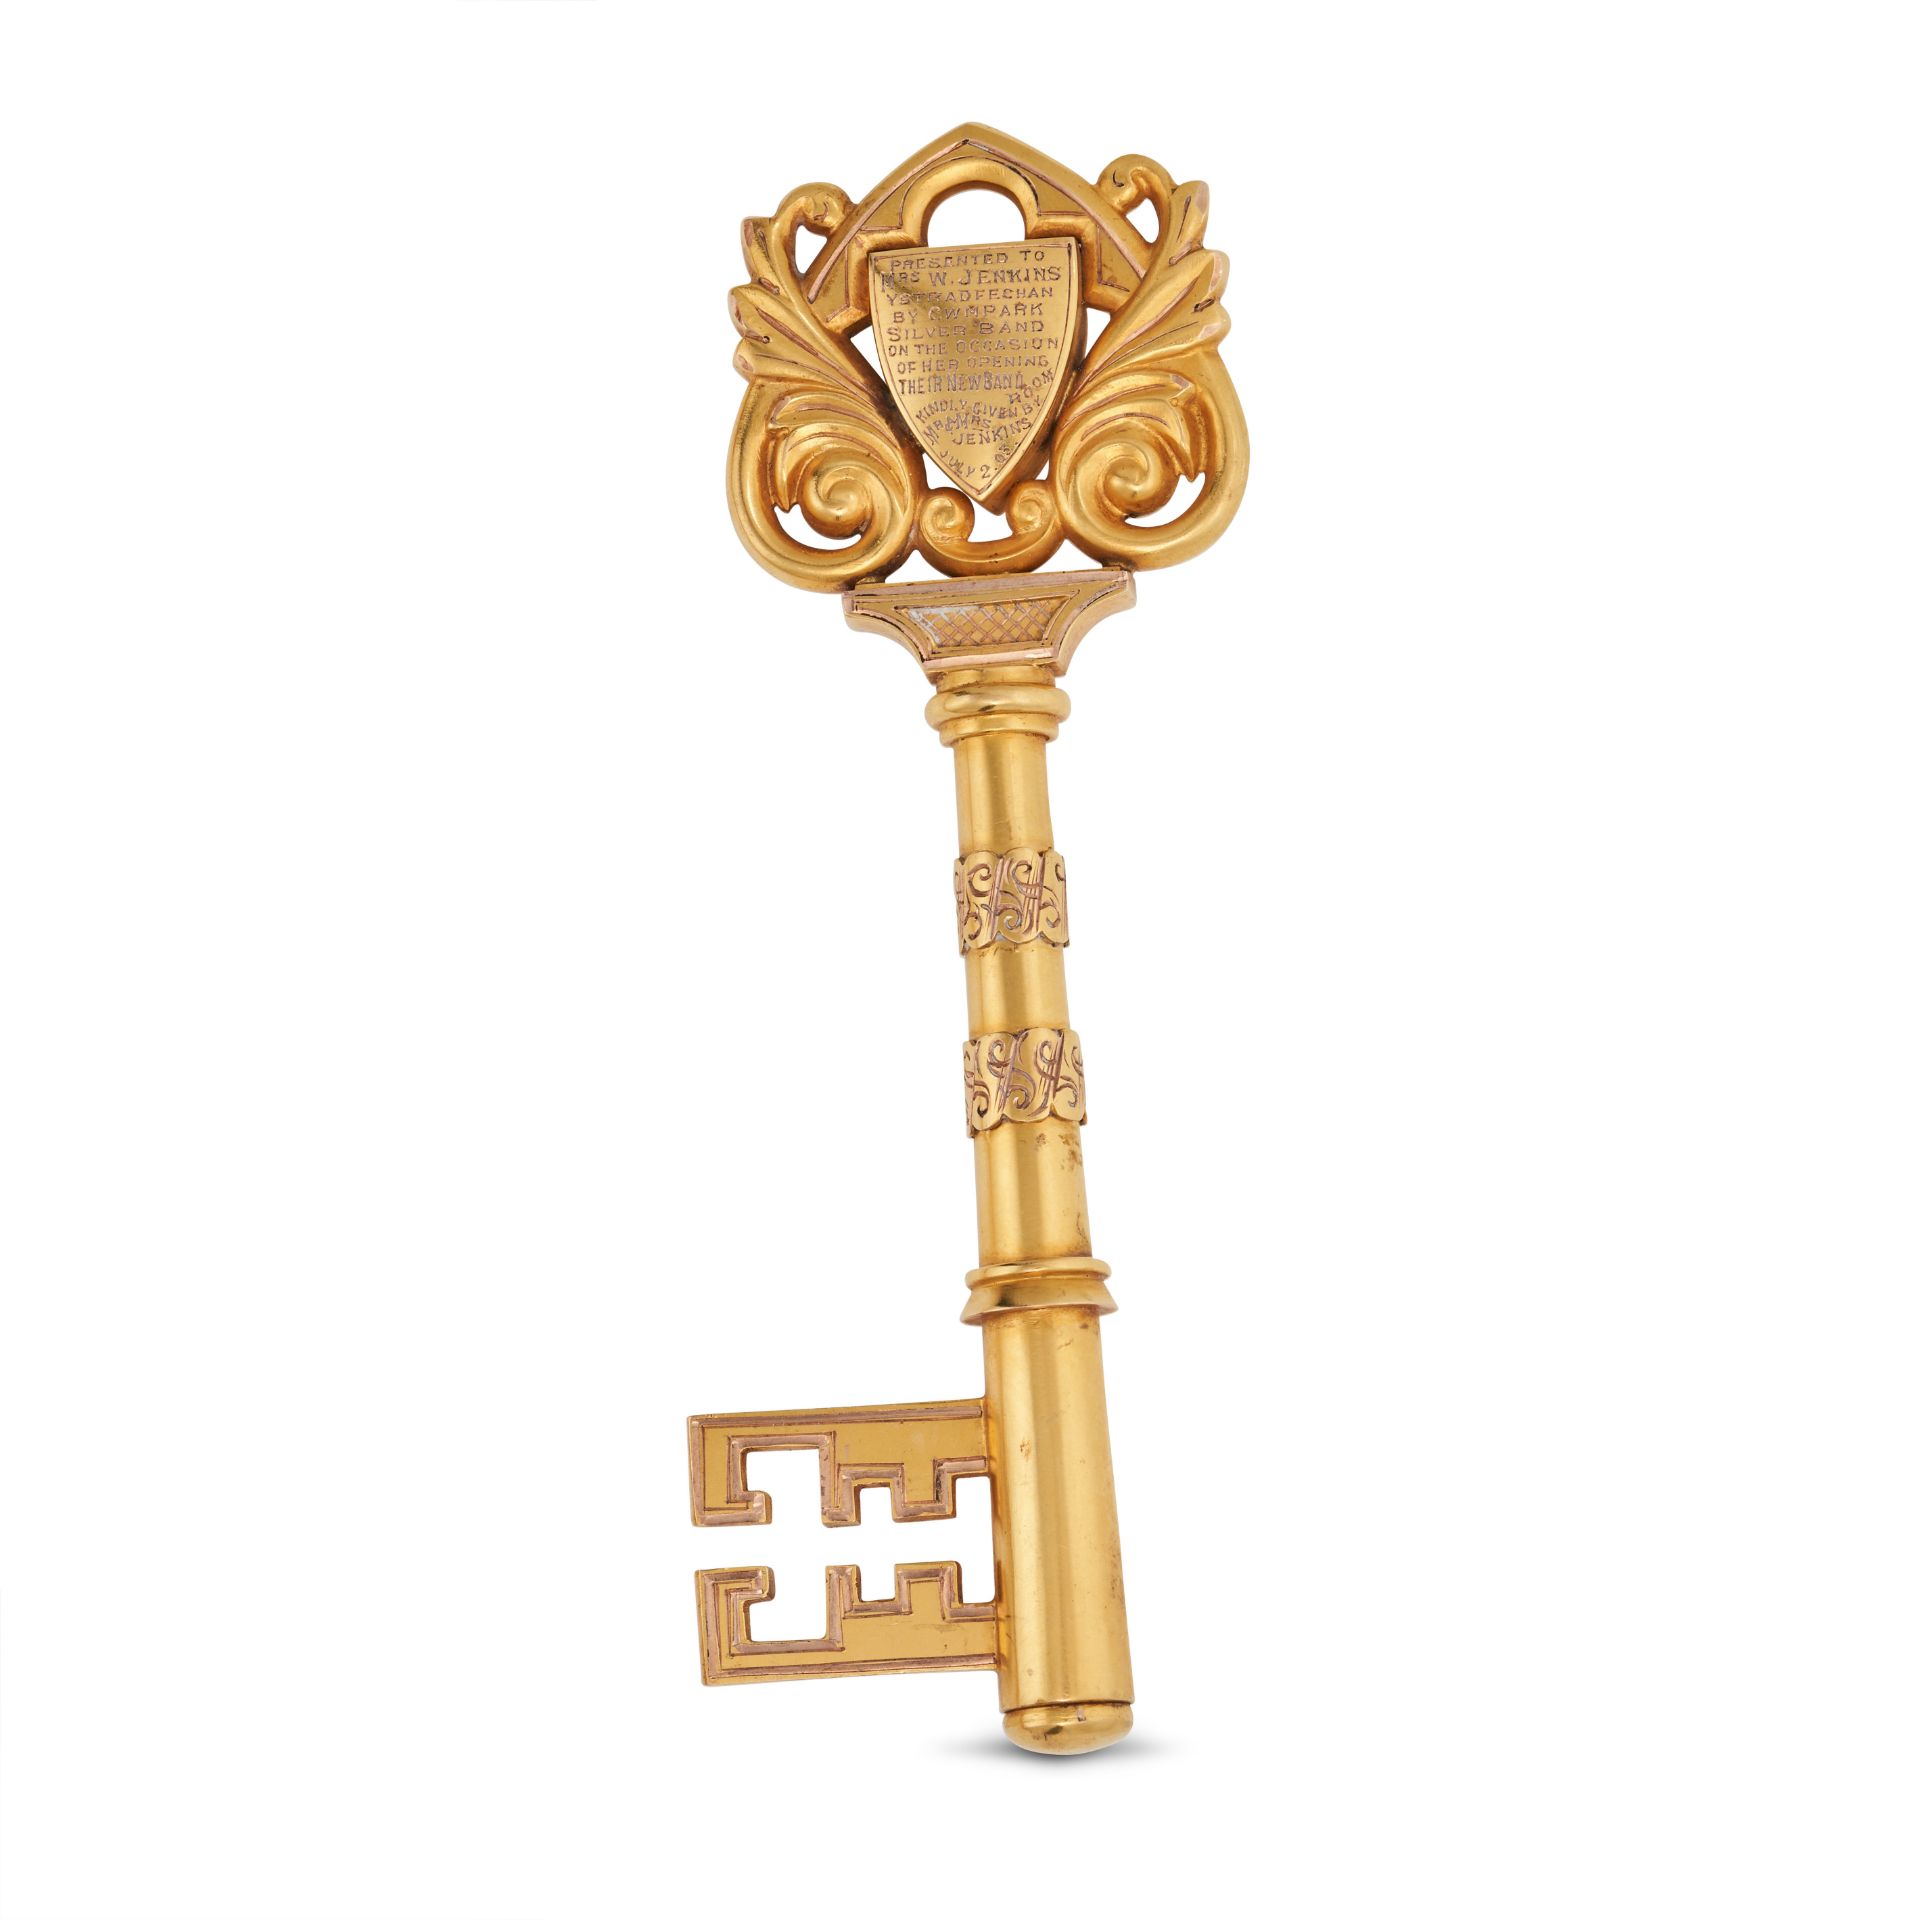 AN ANTIQUE CEREMONIAL GOLD KEY in 9ct yellow gold, engraved 'Presented to Mrs W. Jenkins YSTRADFE...